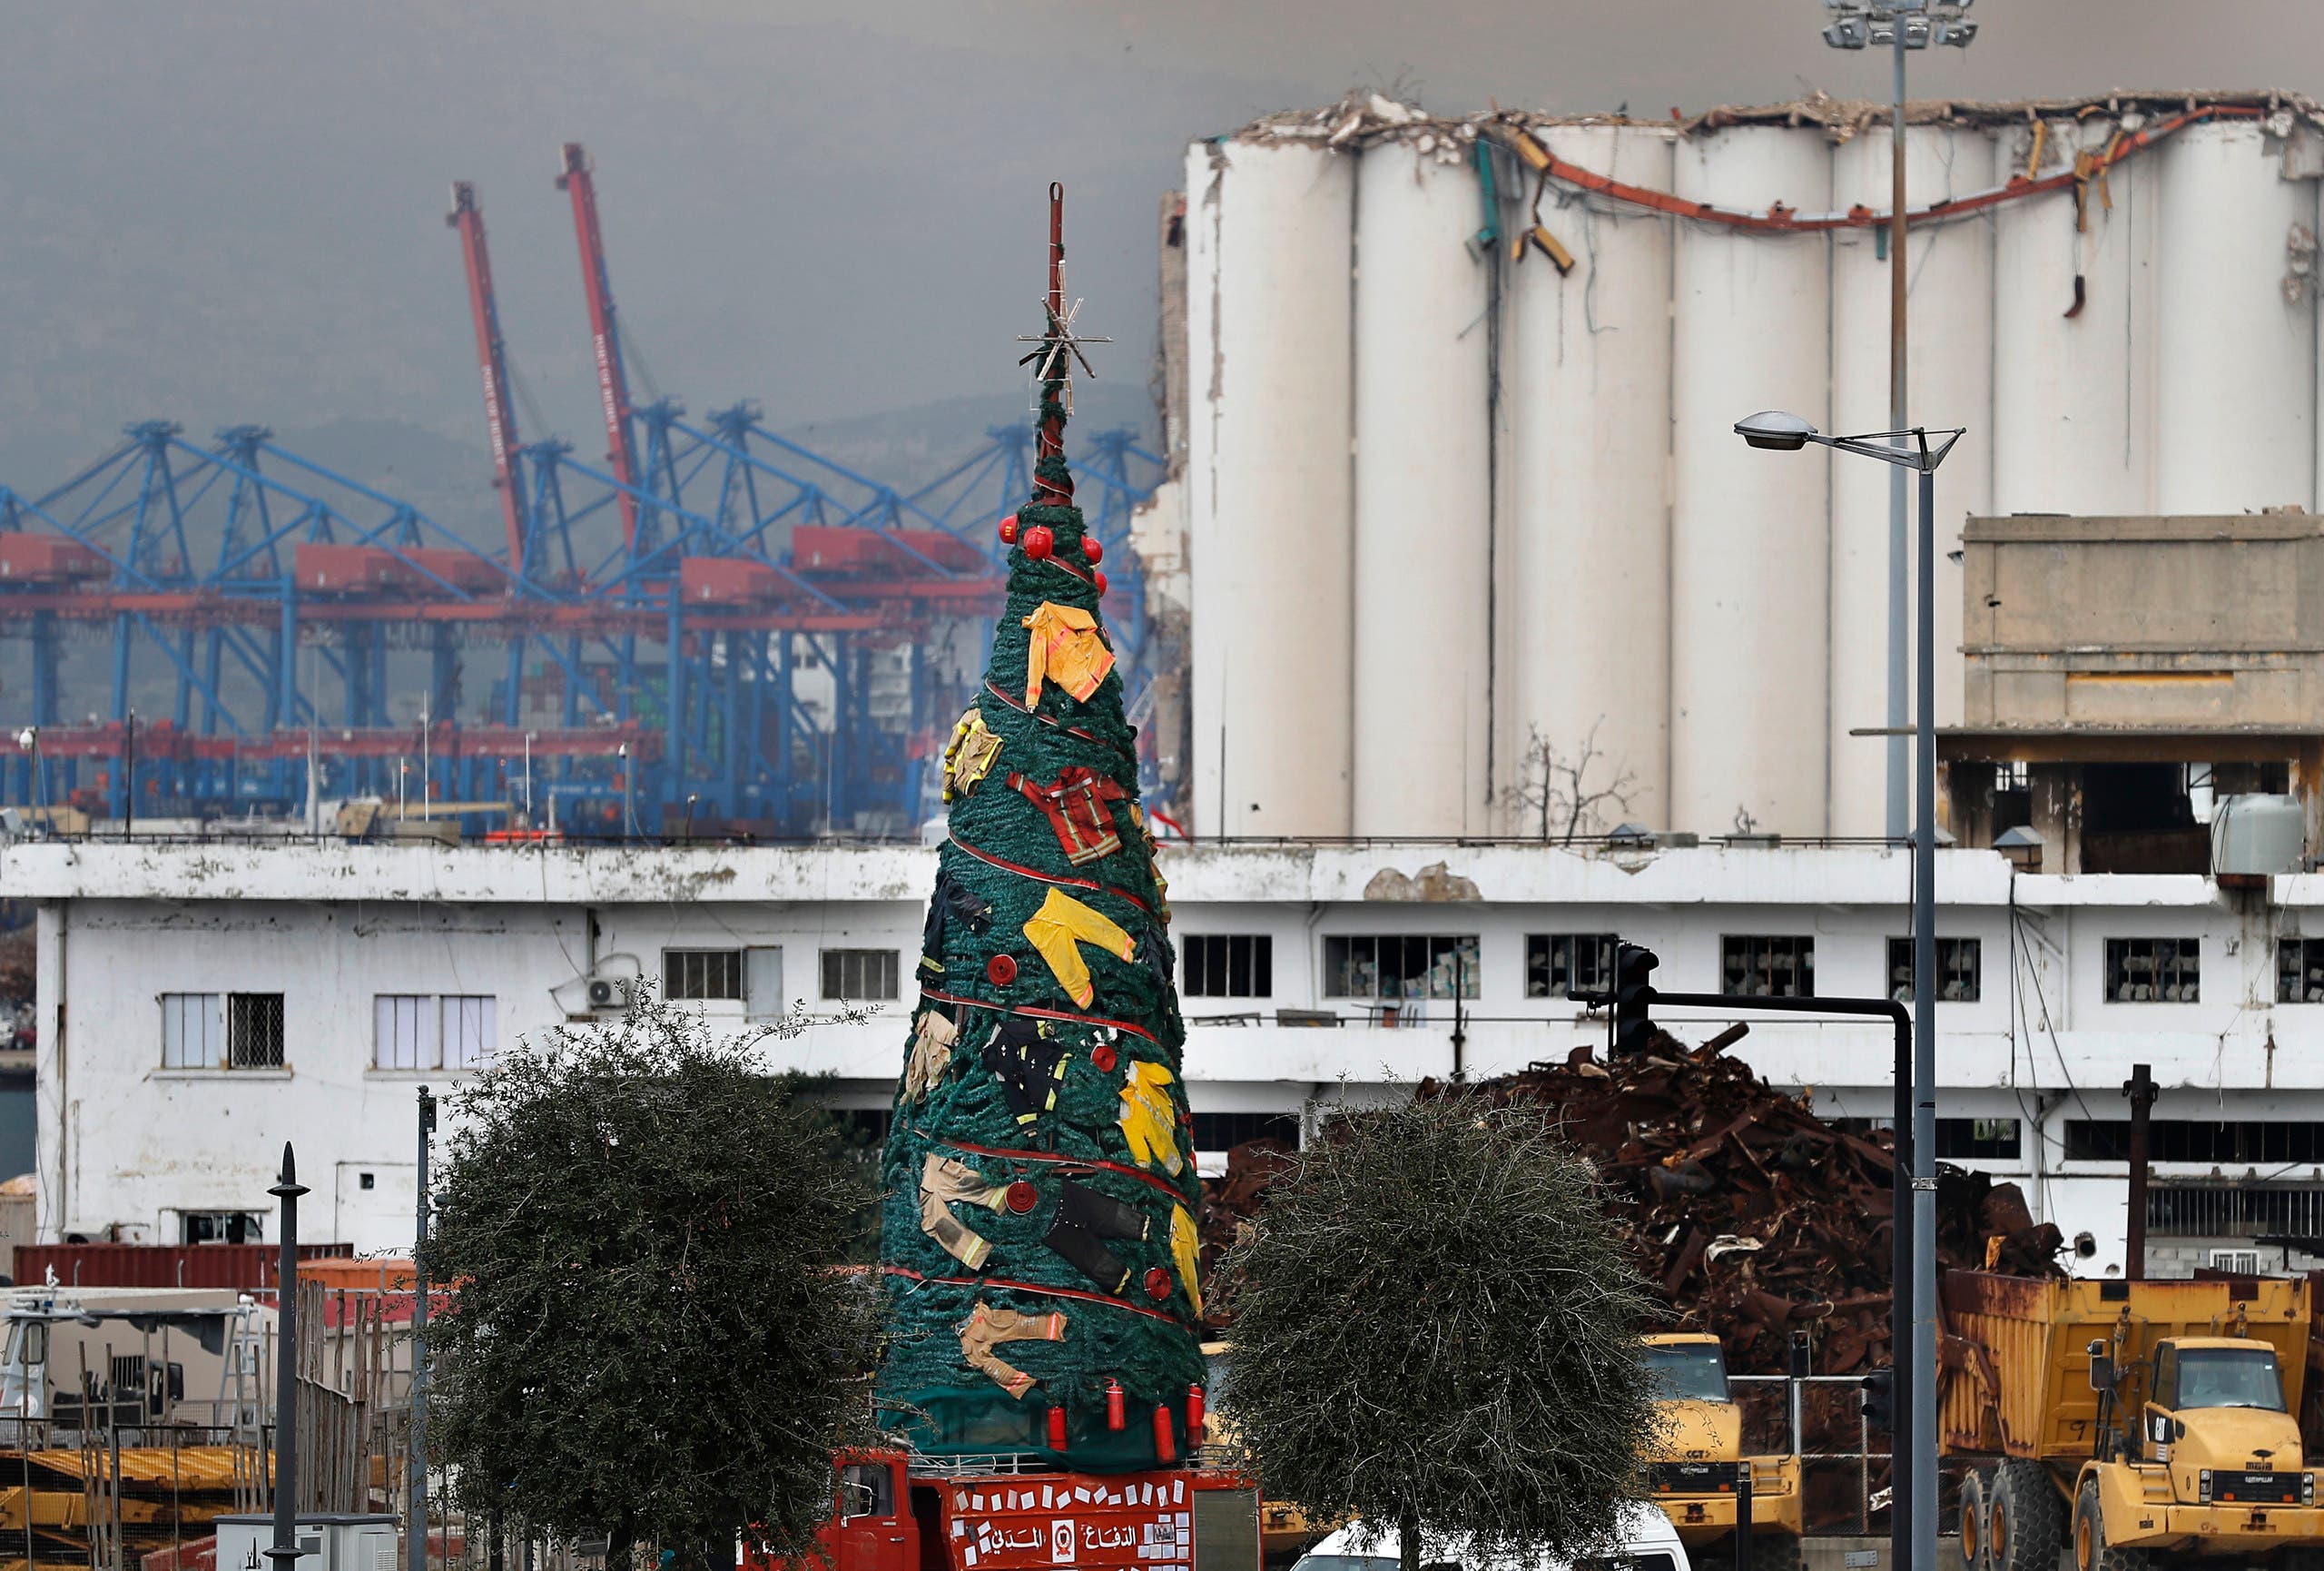 A Christmas tree decorated with firefighter uniforms to commemorate those who died while trying to extinguish the fire in the August explosion at the Beirut seaport is on display in front of damaged silos, in Beirut, Lebanon. (The Associated Press)